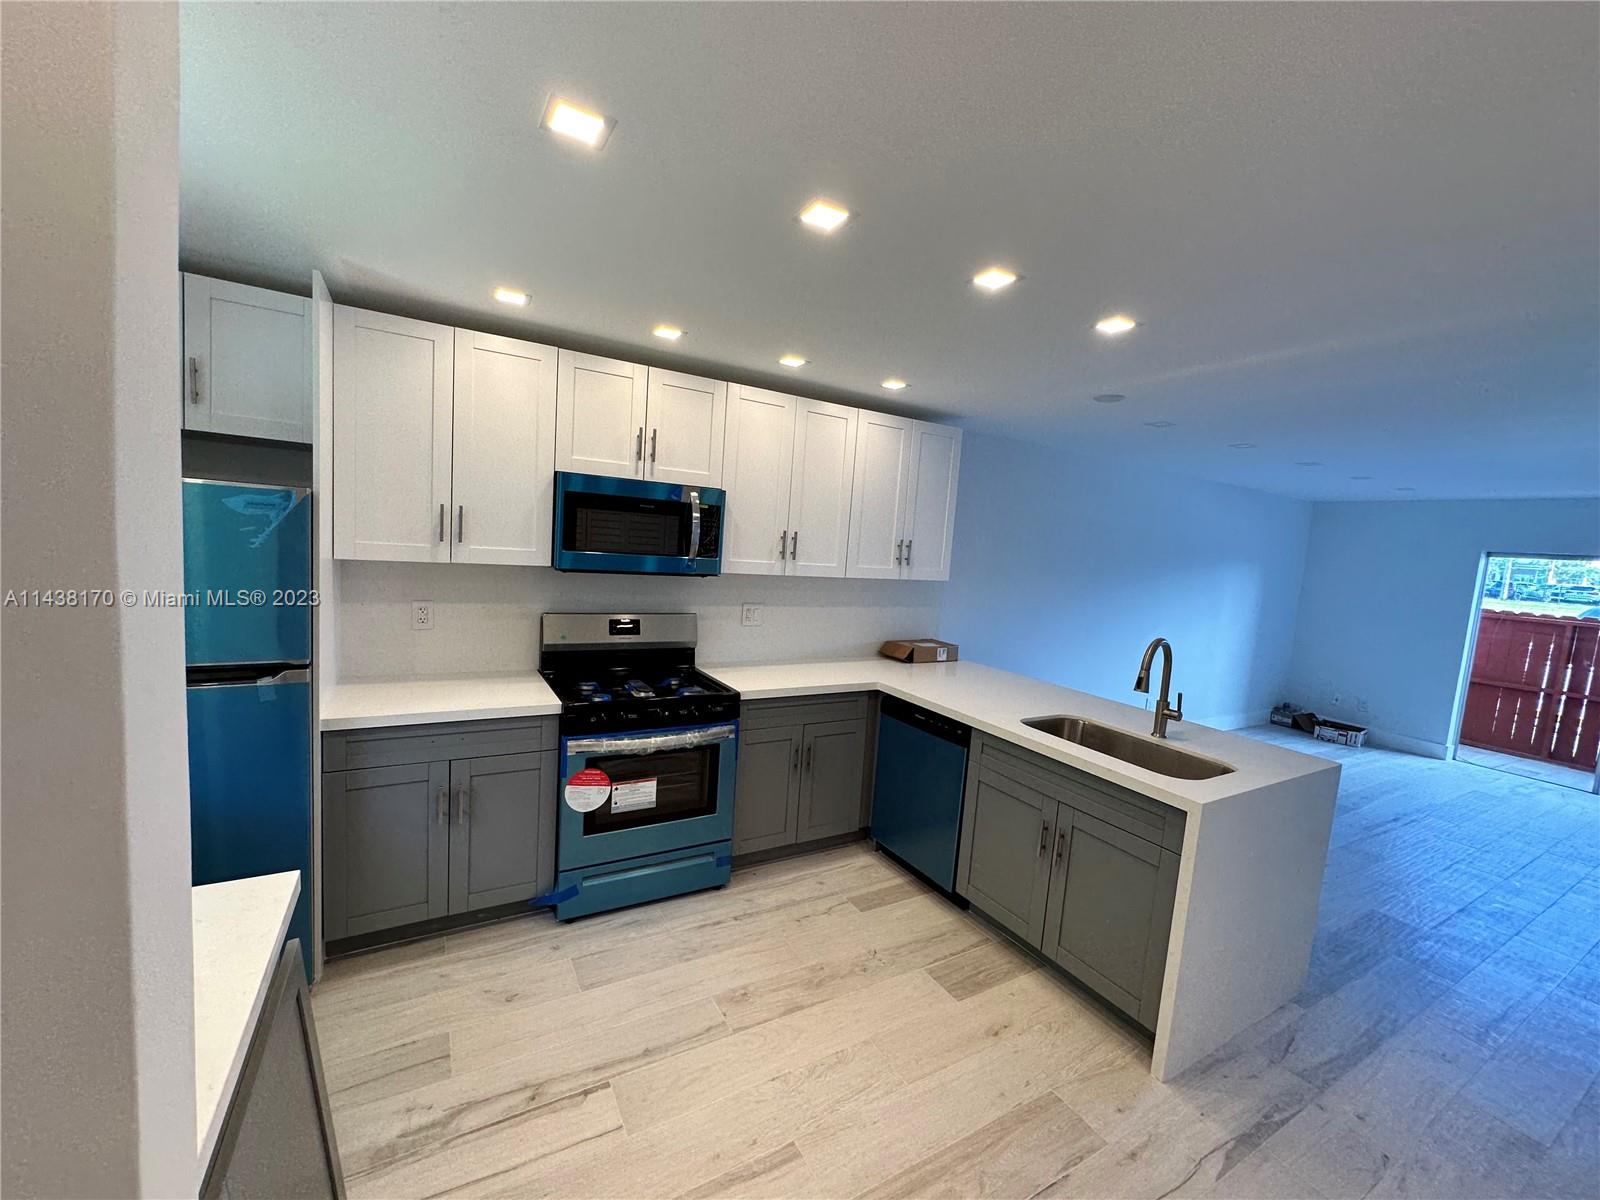 Completely remodeled 1 BEDROOM AND 1 AND 1/2 BATH unit with new floors, new kitchen, new vanities, new bathrooms, new appliances, new countertops.  appliances include refrigerator, microwave/hood, dishwasher, gas stove/oven. Walking distance to Dadeland Mall, around the corner from us1, washer and dryer inside unit. Community pool, tennis courts, gym.   Won't last!
 24 HOUR GATED SECURITY